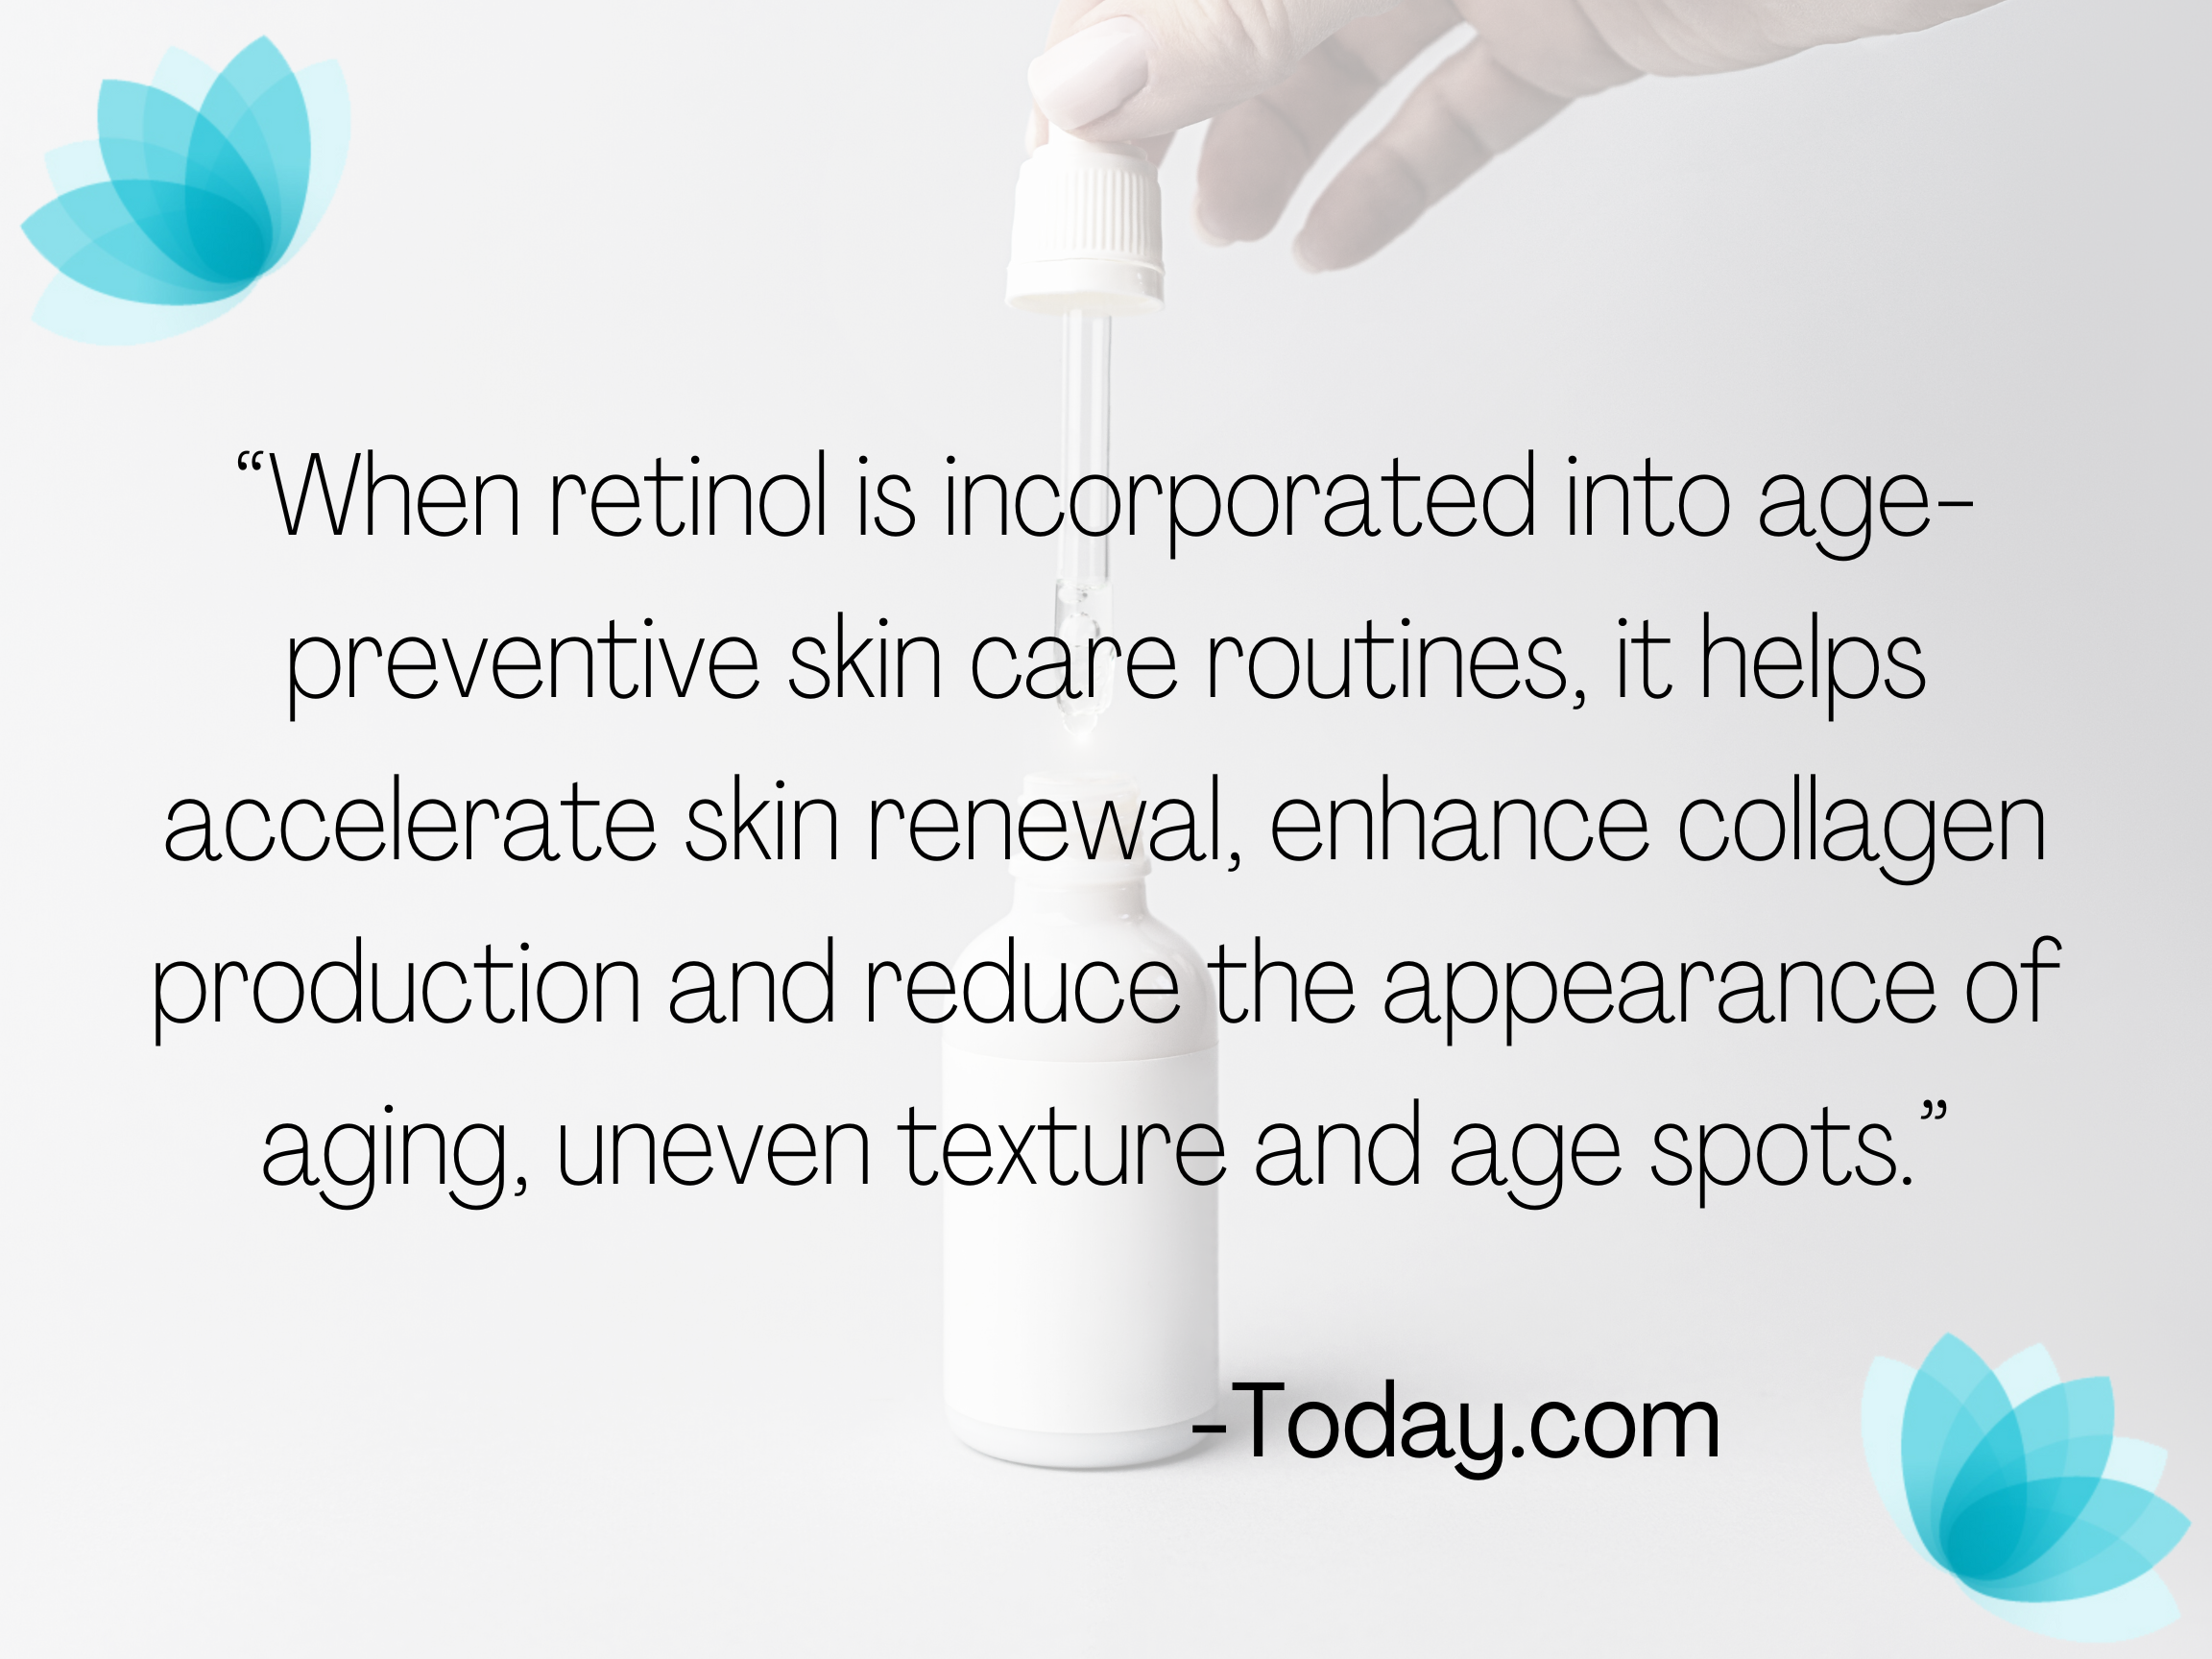 Quote from Today.com on benefits of retinol.